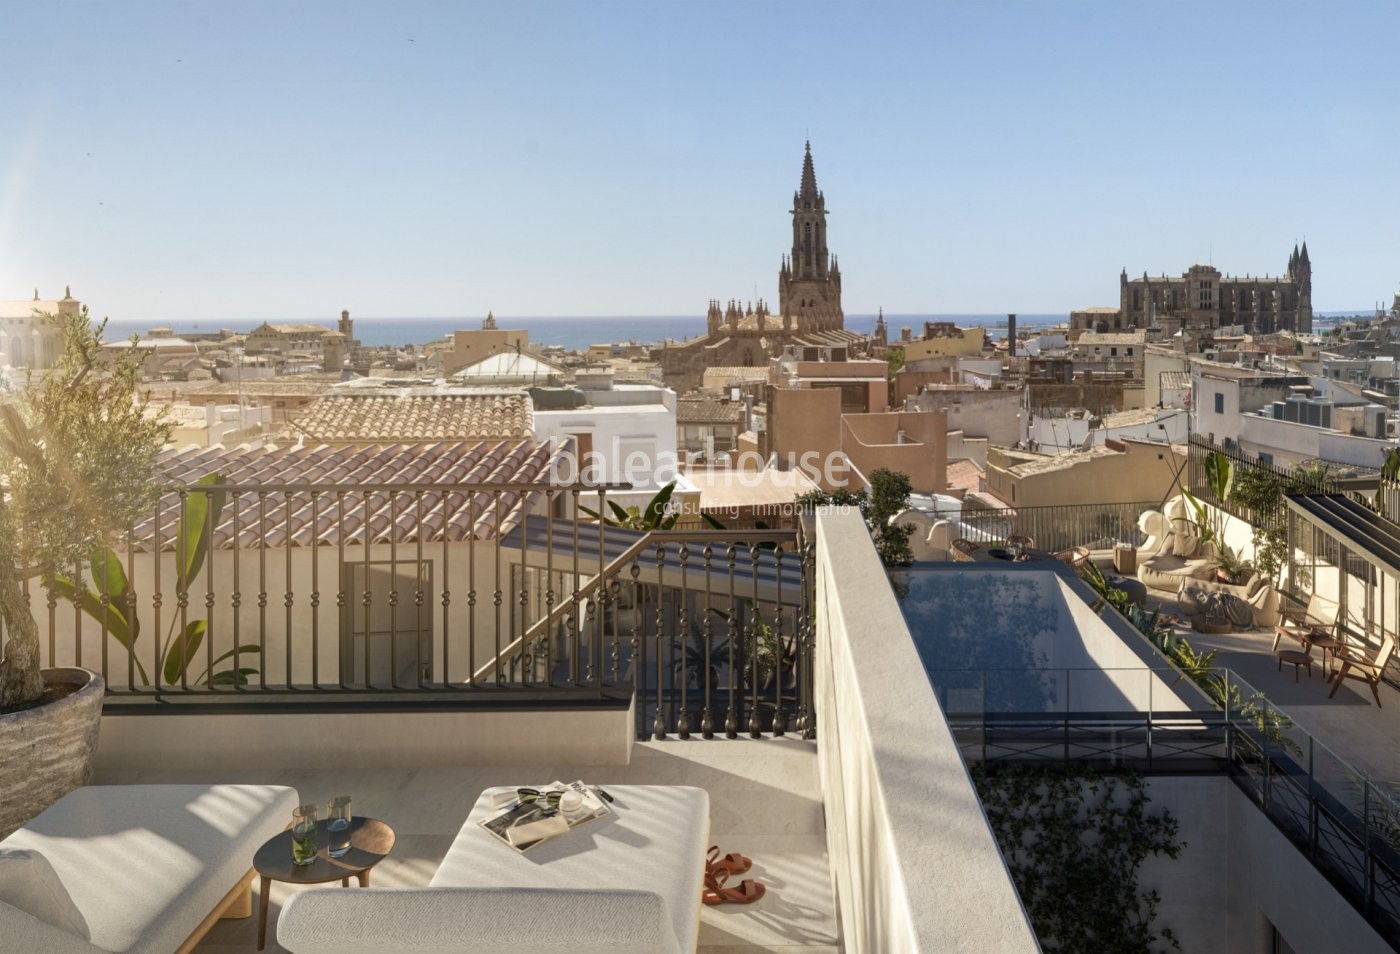 Luxury and sea views in this brand new penthouse with solarium and swimming pool in Palma old town